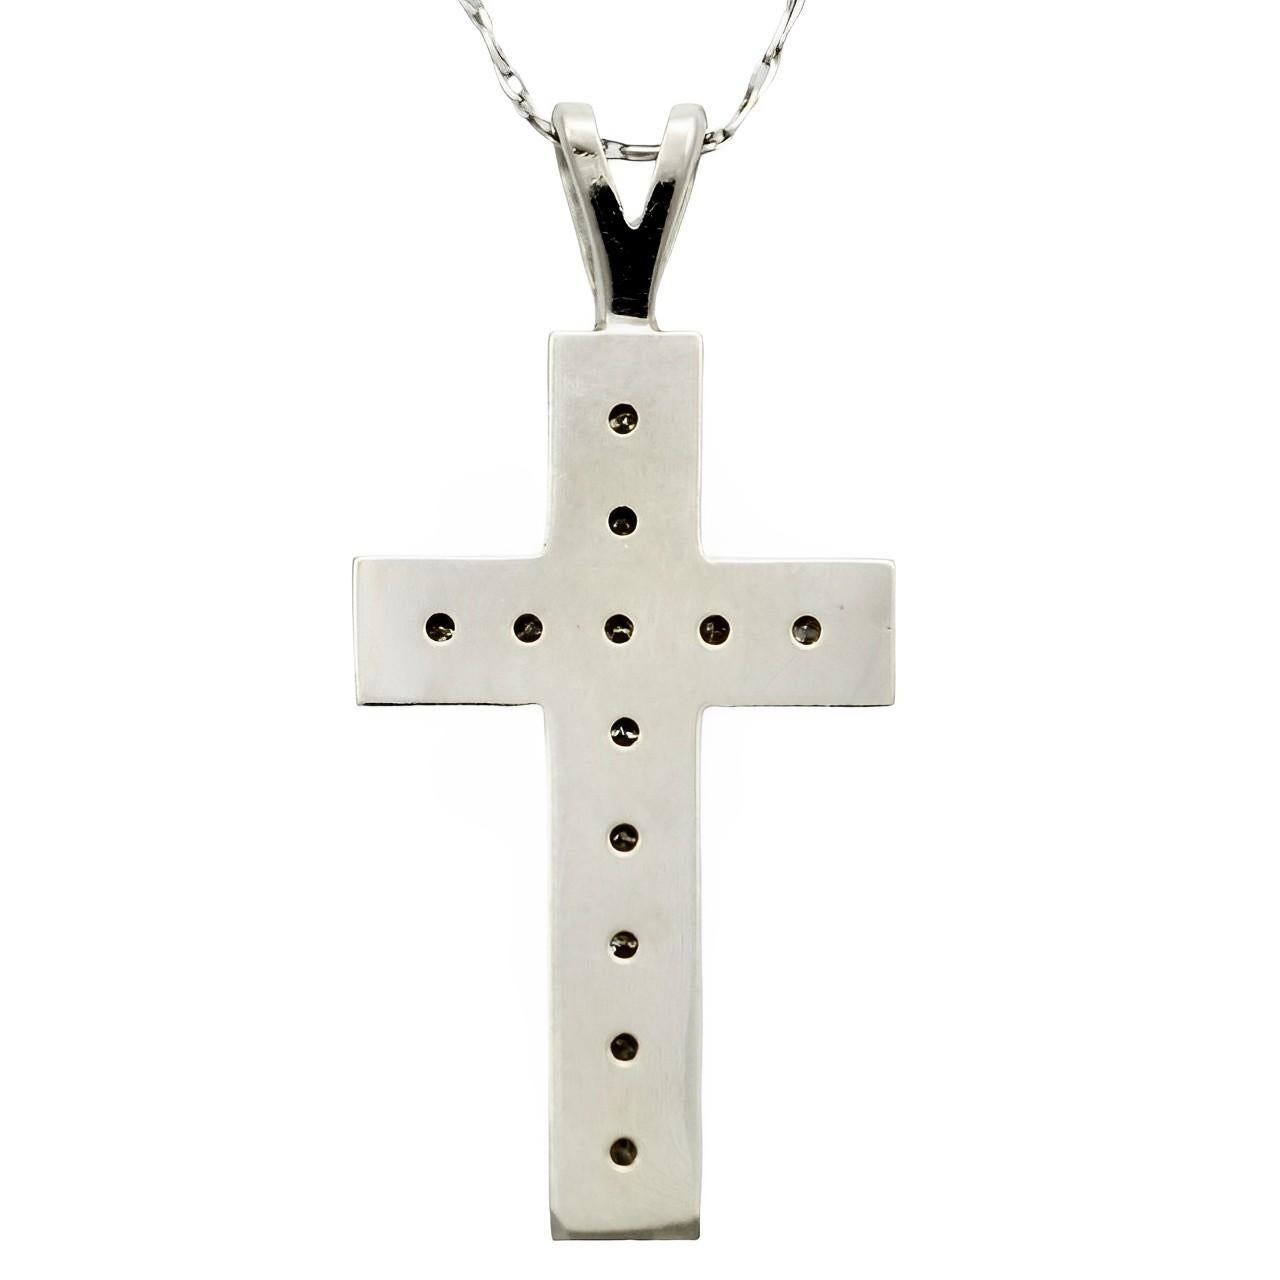 Beautiful 10K white gold fine rope chain with a white gold cross set with twelve diamonds. Measuring chain length 49 cm / 19.29 inches, and the diamond cross is length, including the hanging loop, 2.35 cm / .9 inch, by 1.1 cm / .4 inch.

This is a